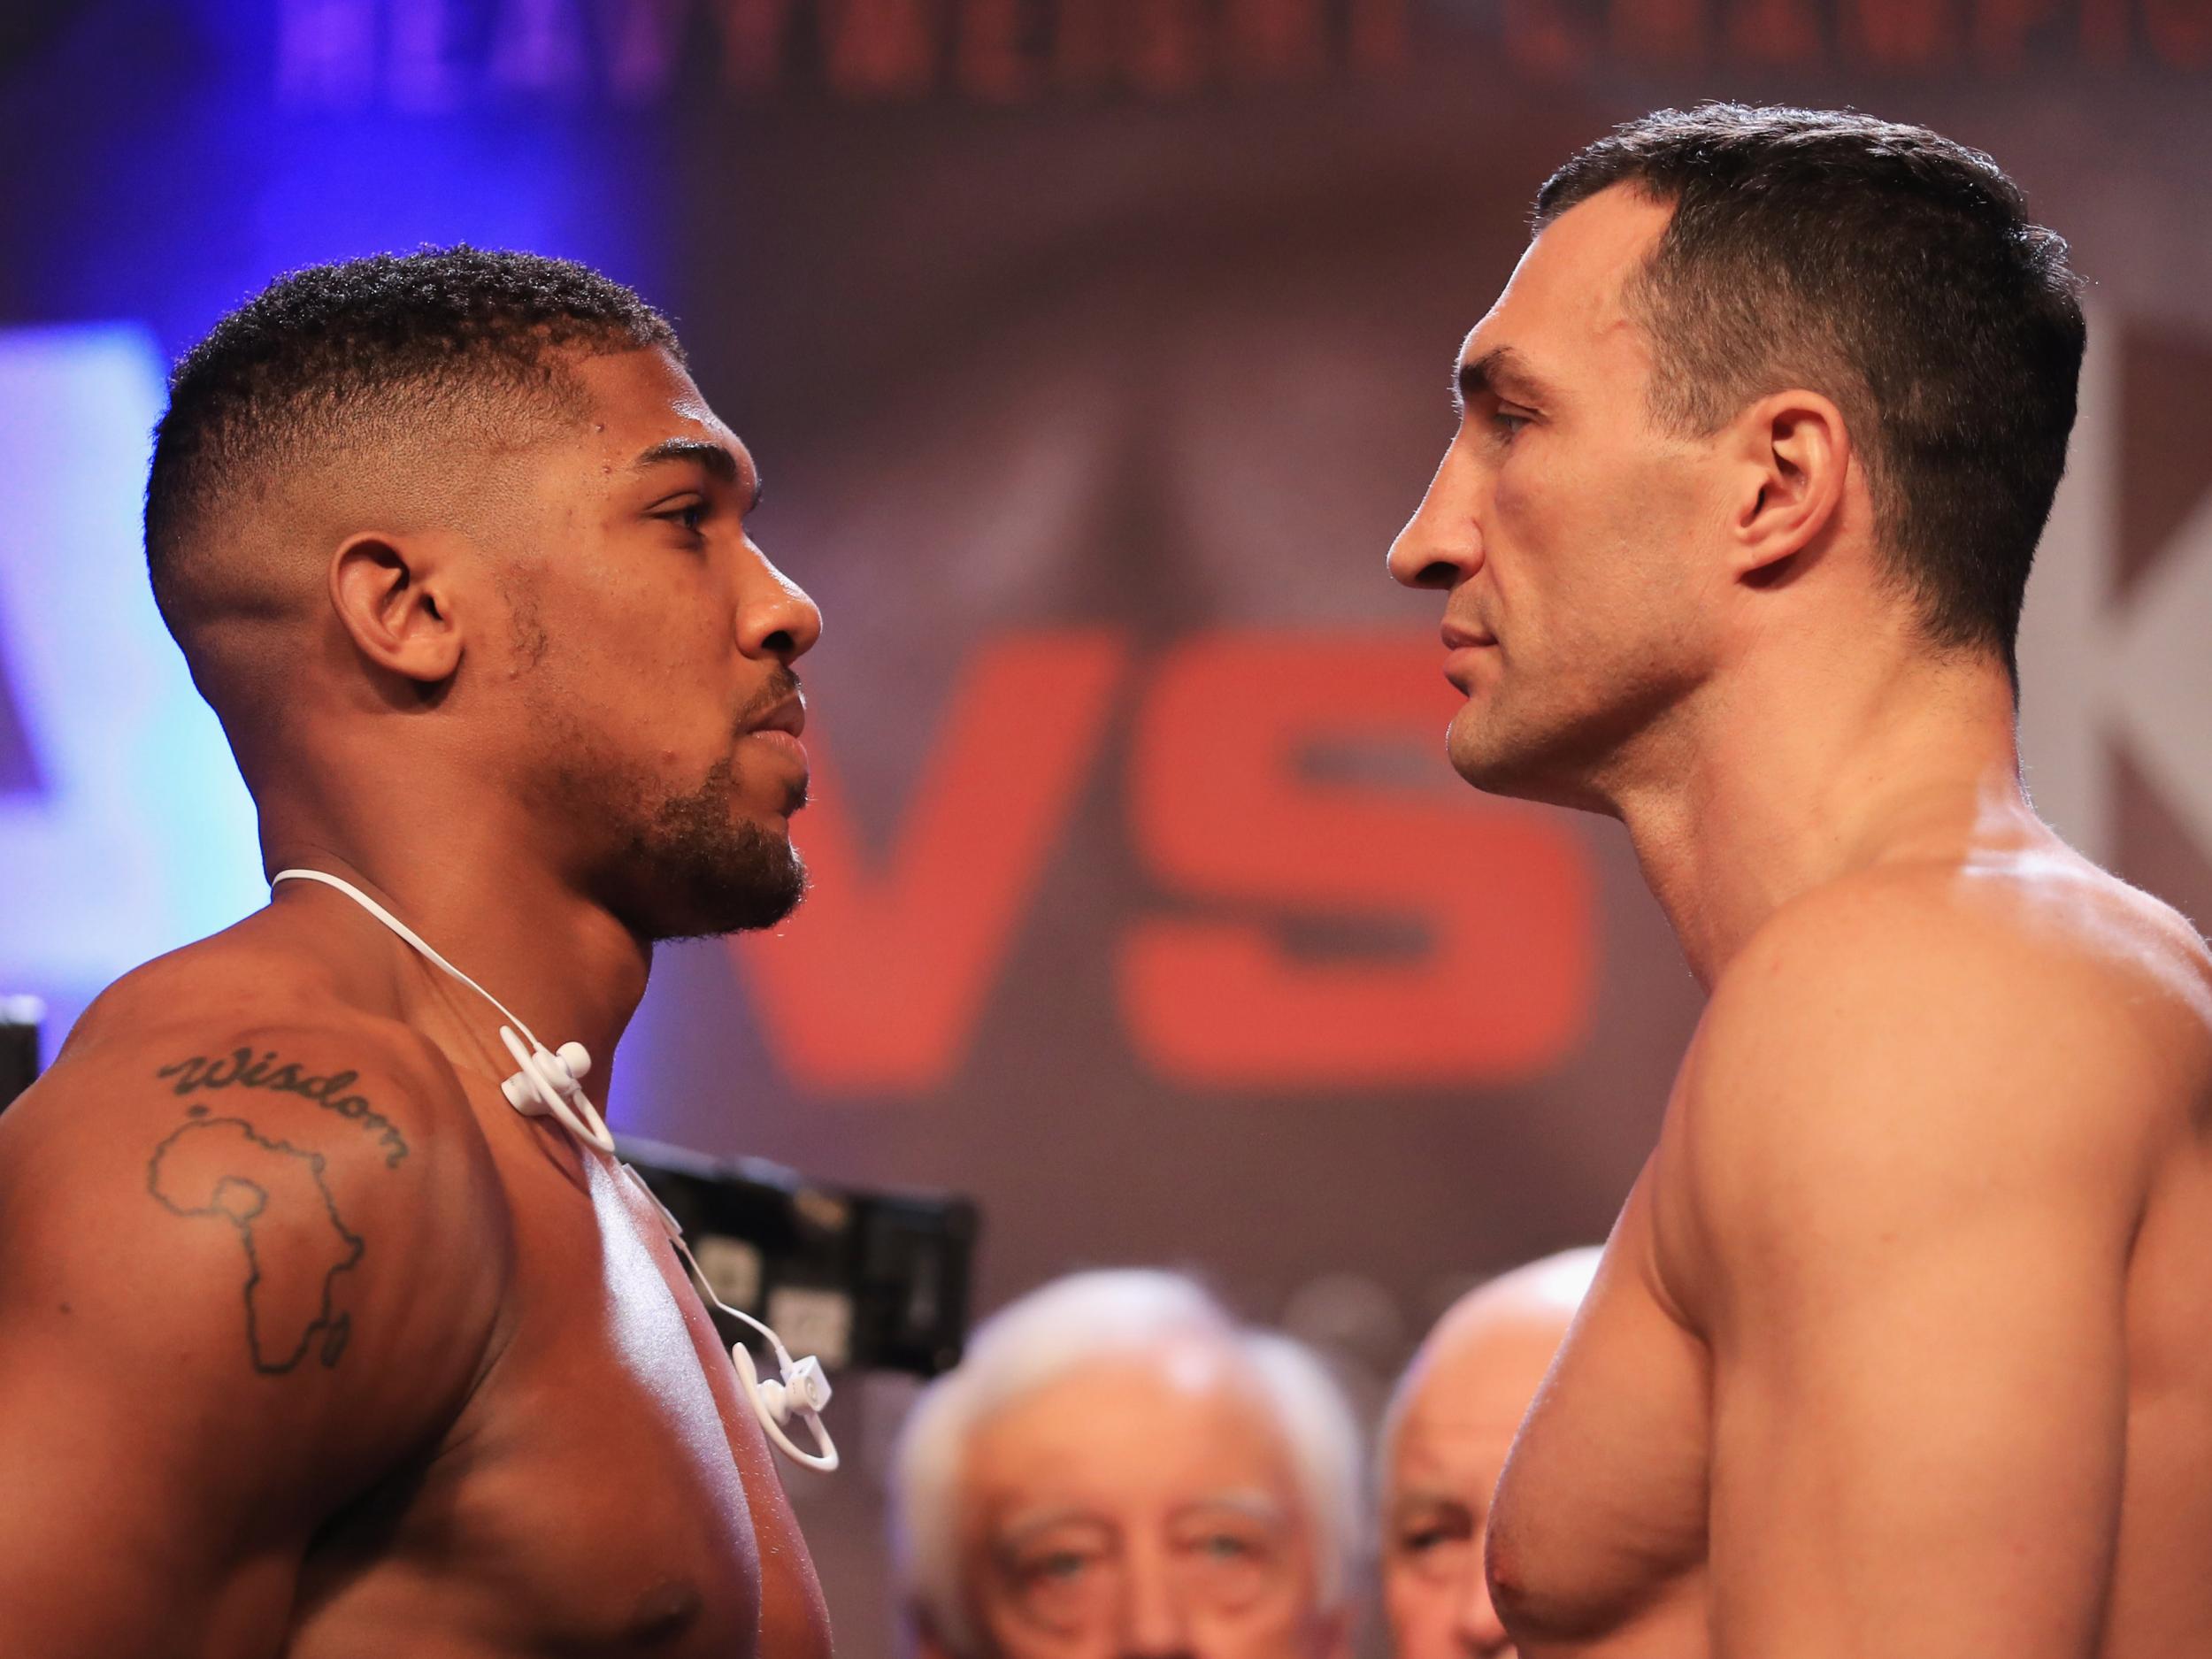 It's youth vs experience with Joshua's 18 professional fights to Klitschko's 68